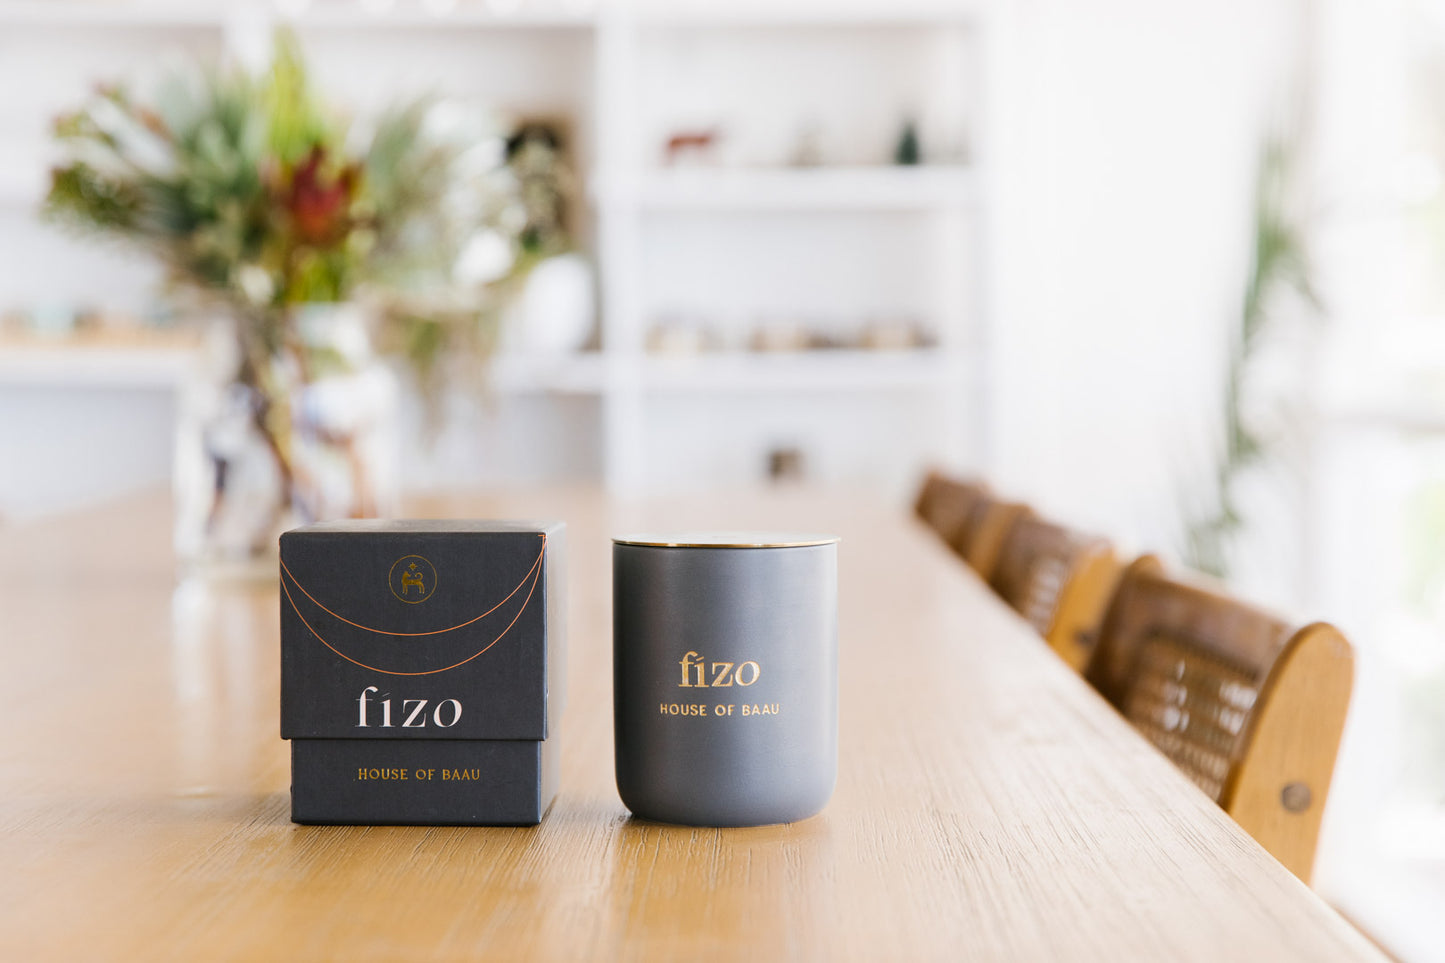 FIZO - Lavender, Vanilla & Clary Sage Essential Oil Soy-Beeswax Dog Friendly Candle